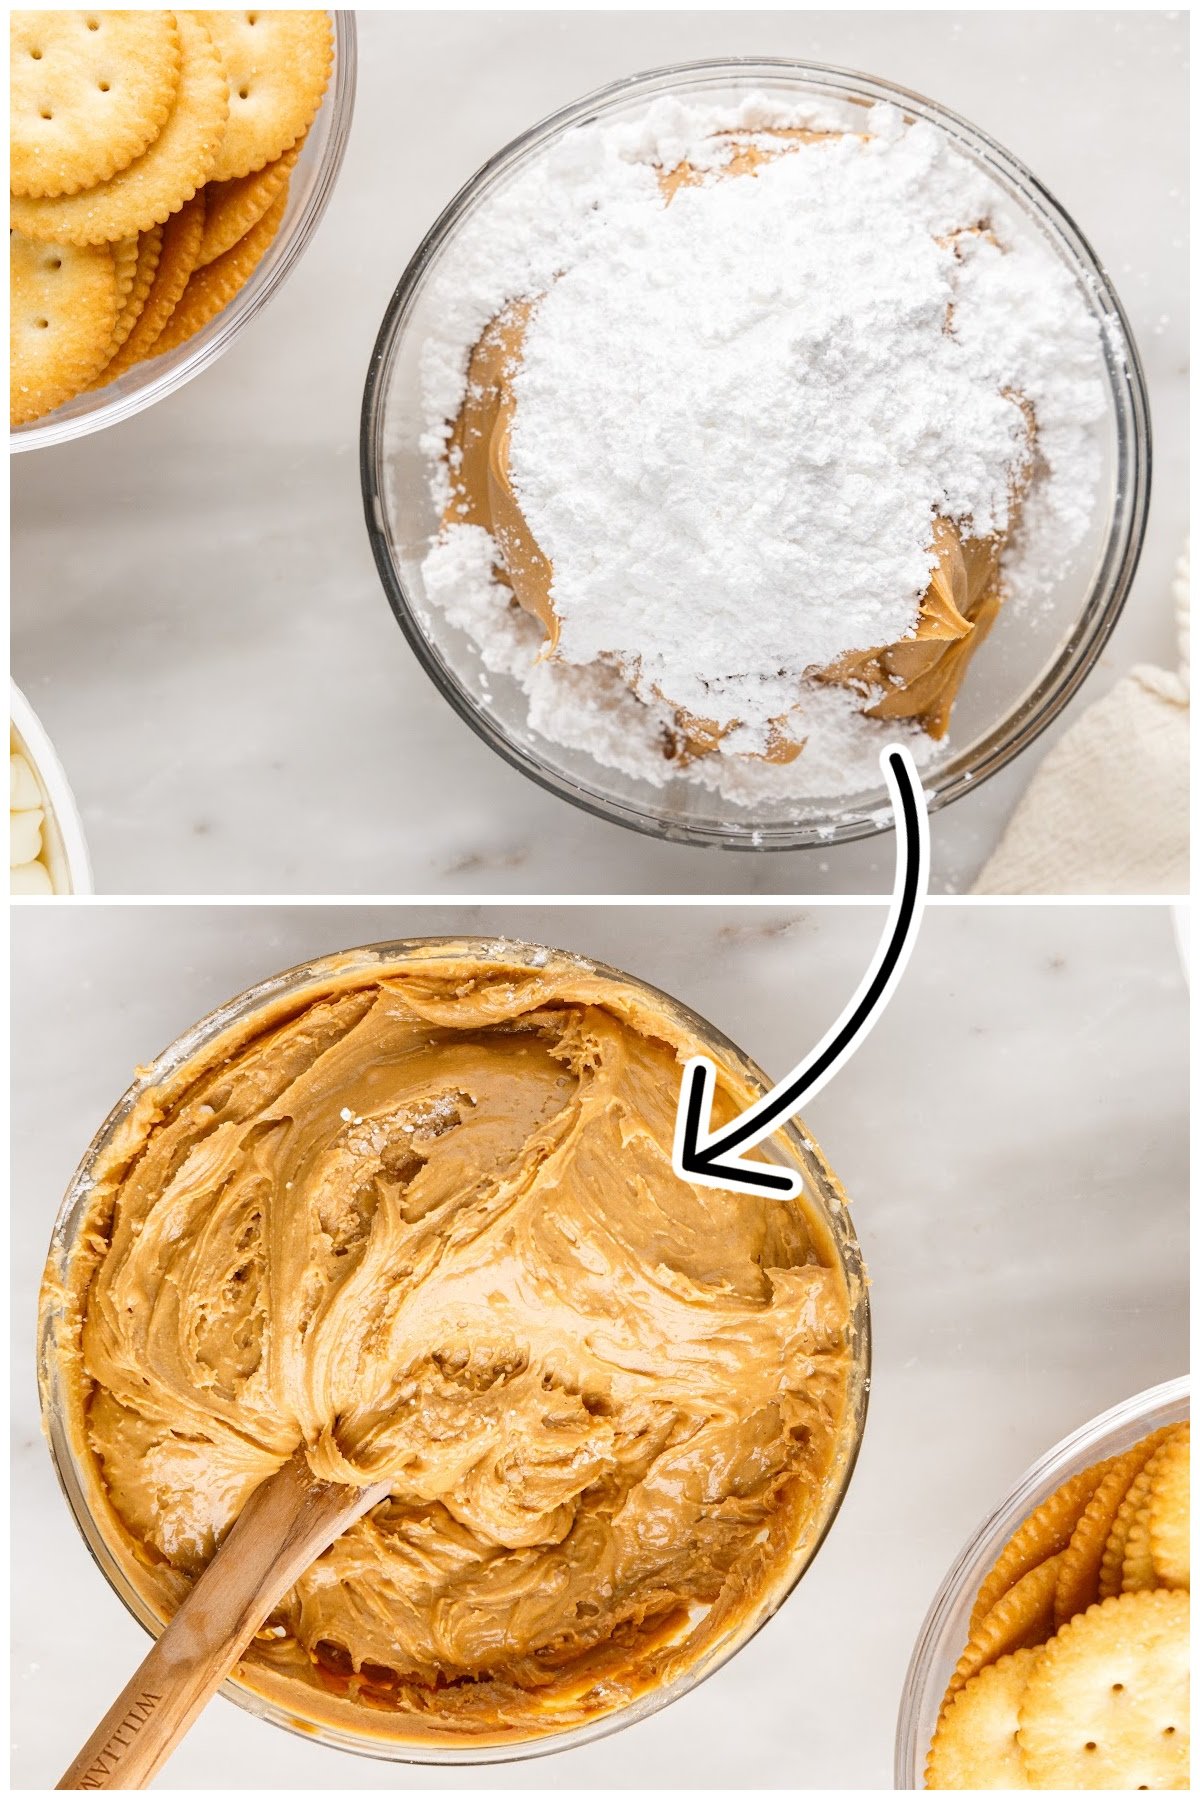 Two steps shown here to mix the cracker filling.  